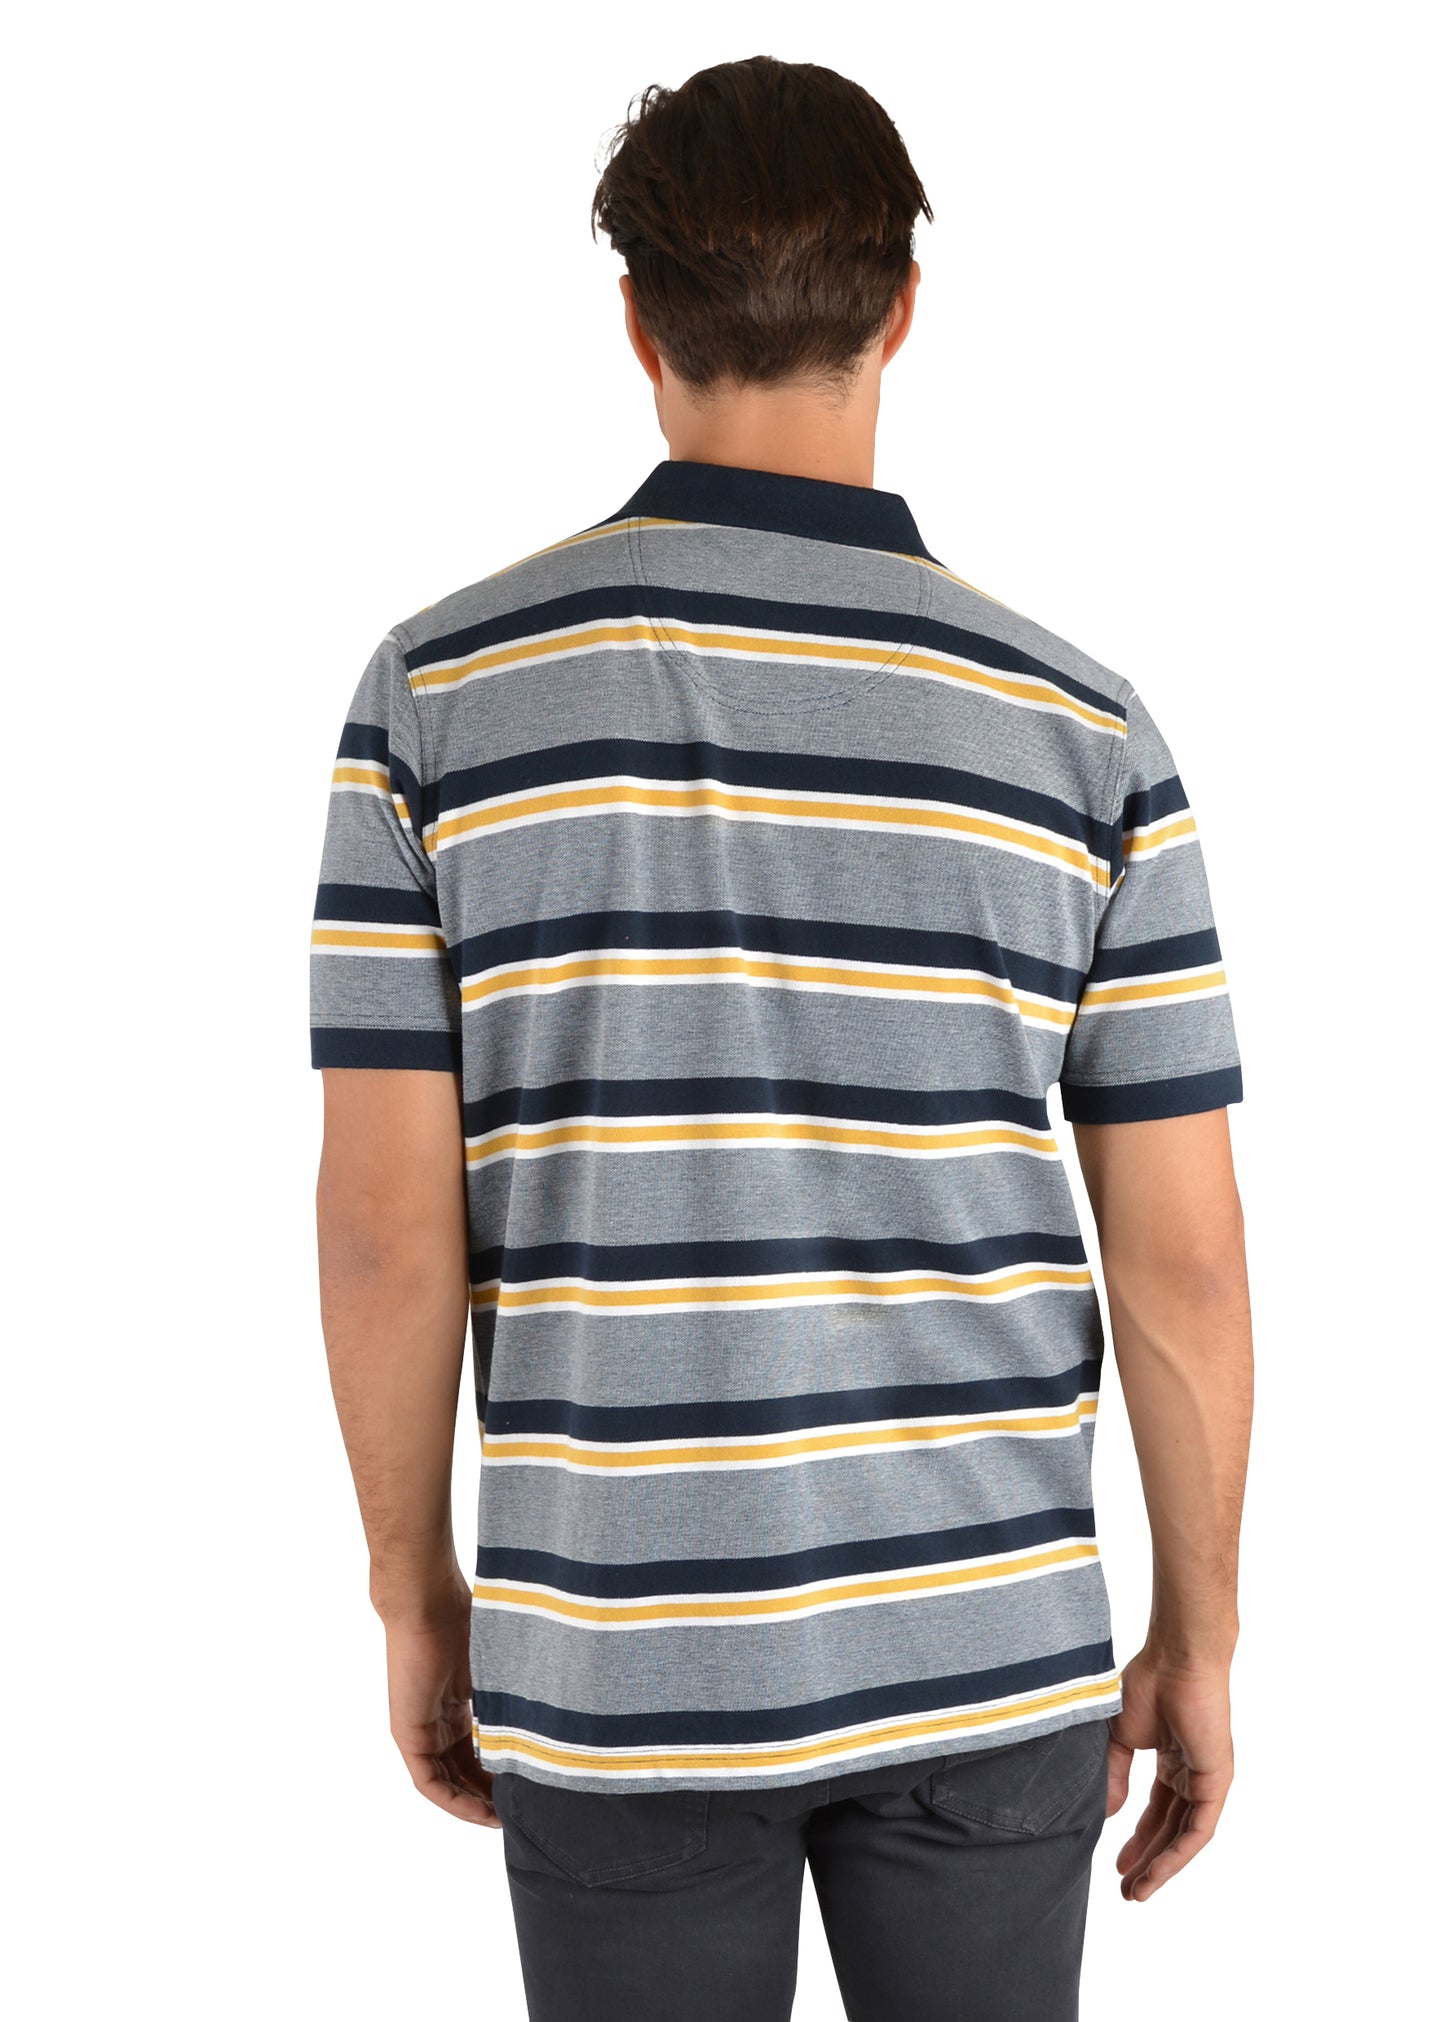 Thomas Cook Mens Wendal 1-Pkt Tailored S/S Polo - T2S1506008